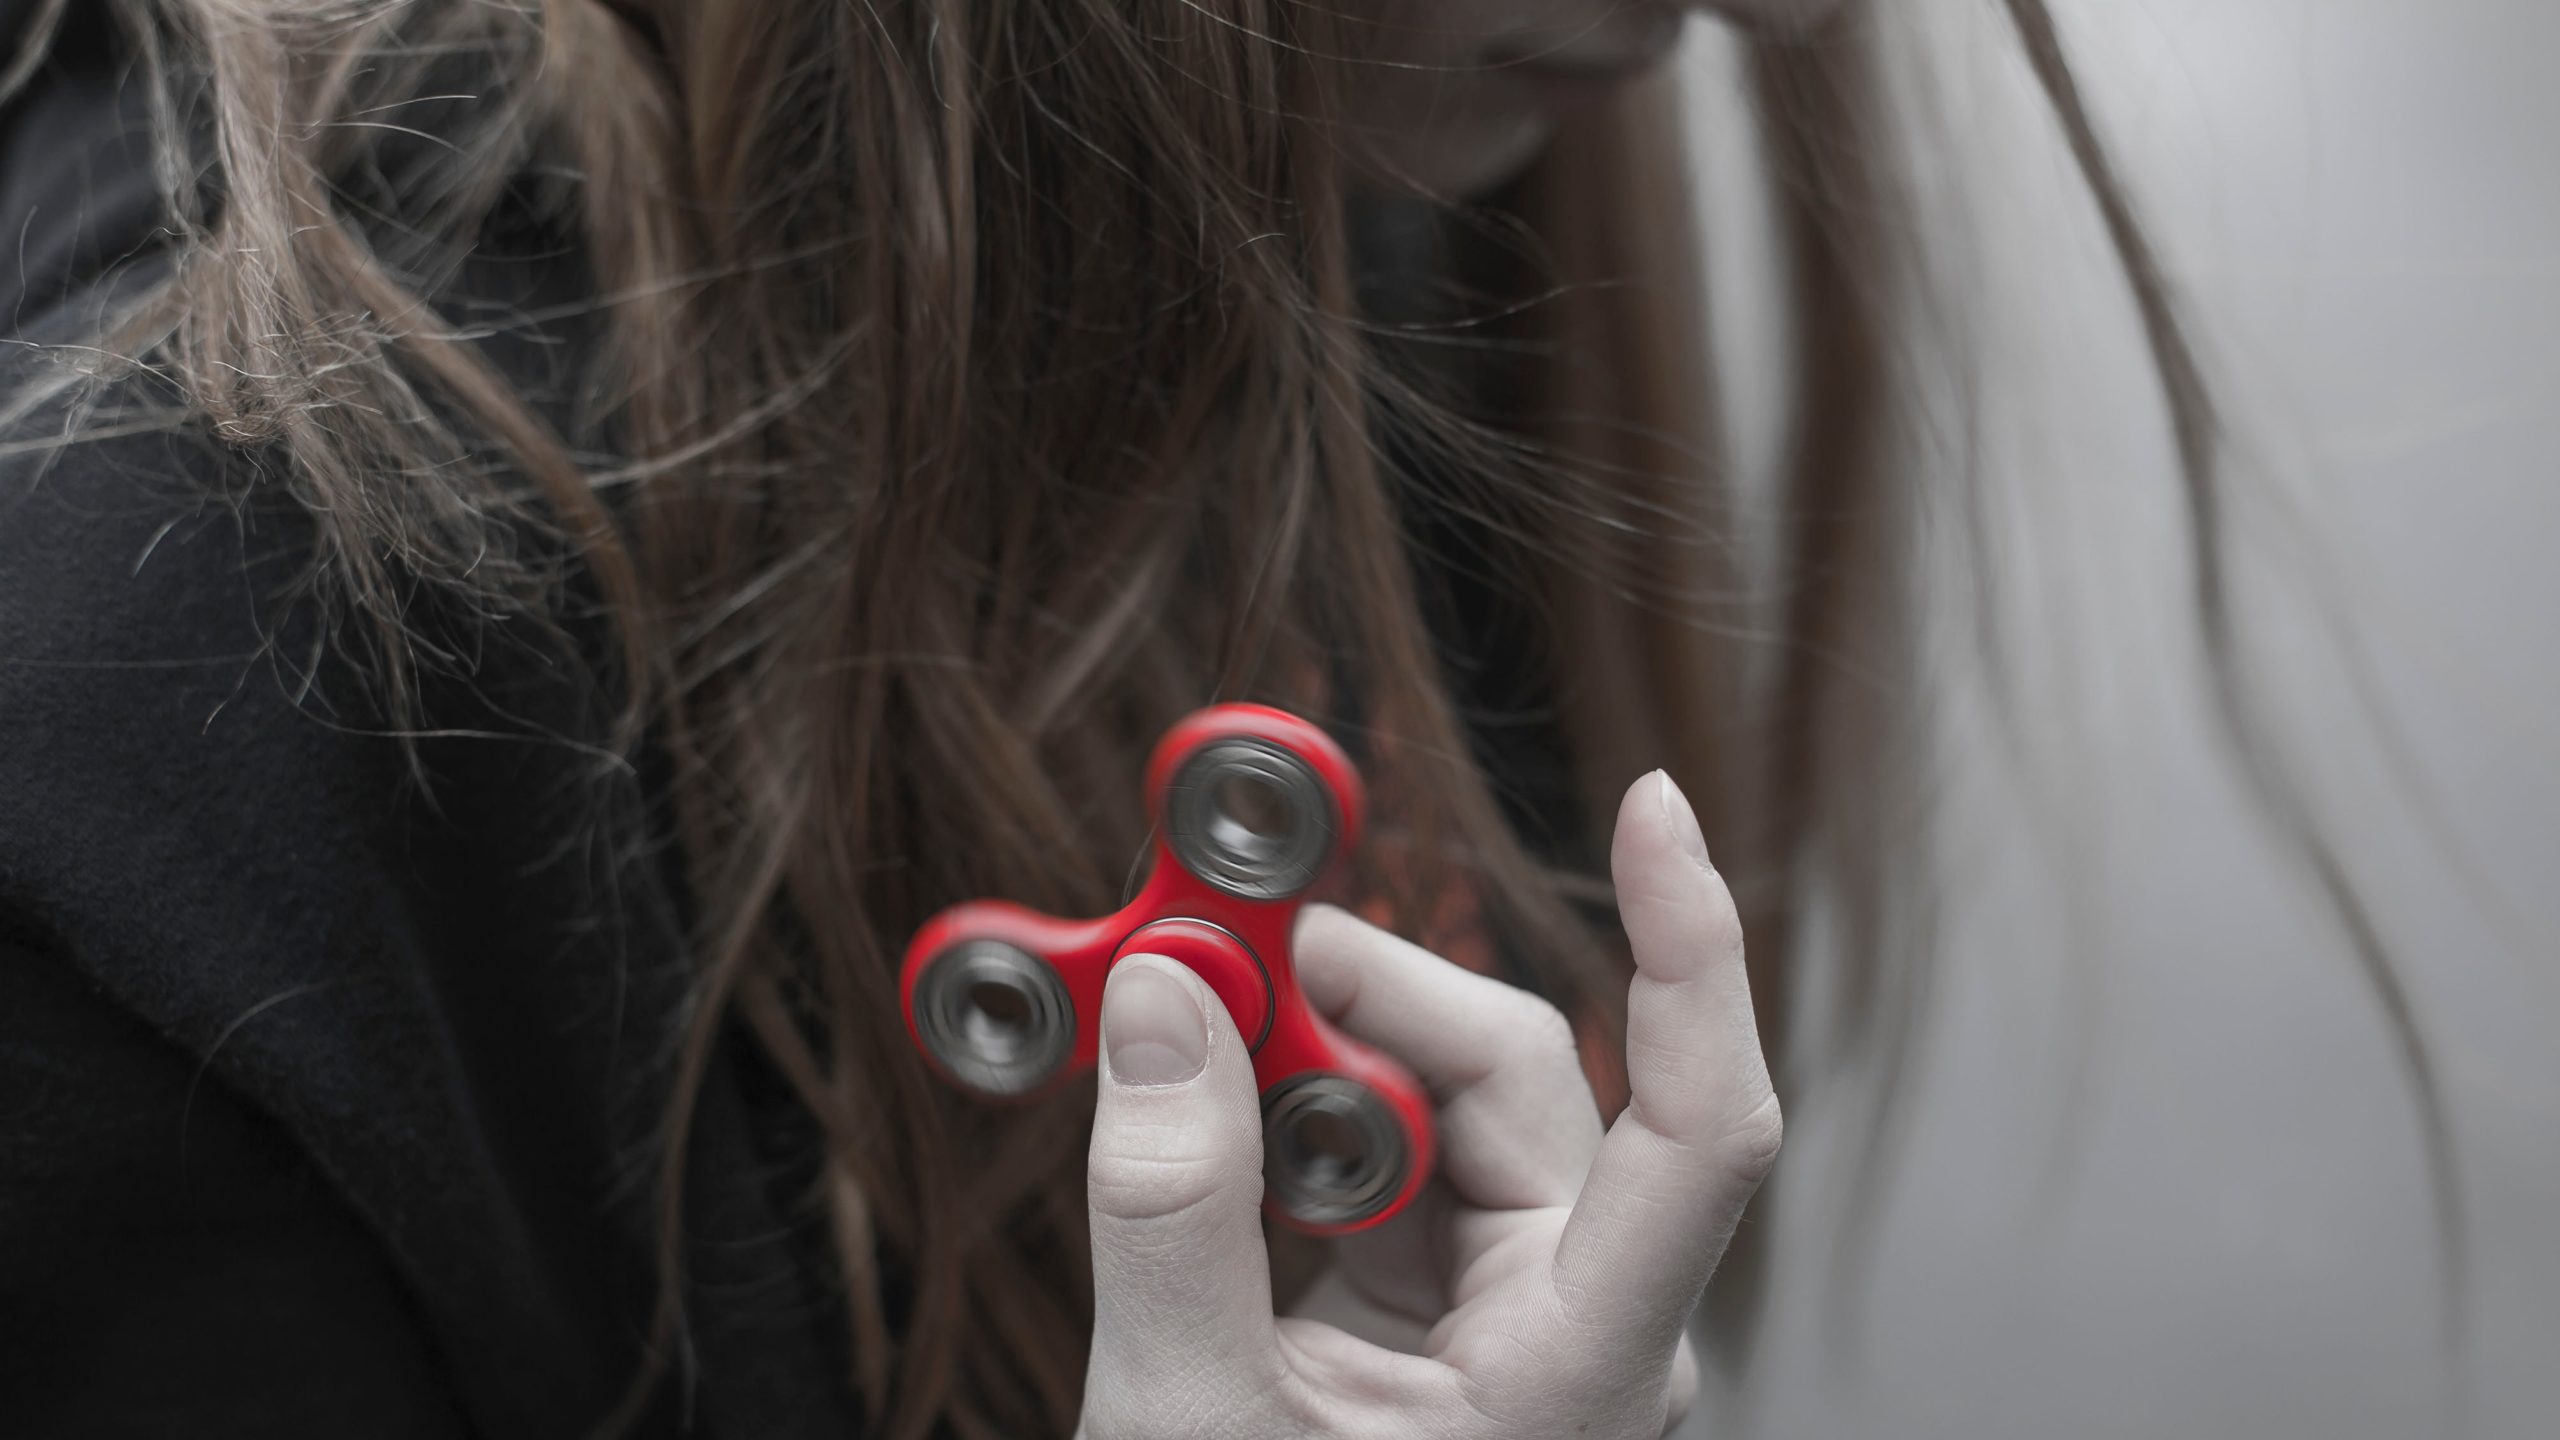 Fidget spinners have figuratively lost their momentum as a pop culture trend, there are still those who find the coping tool helpful.